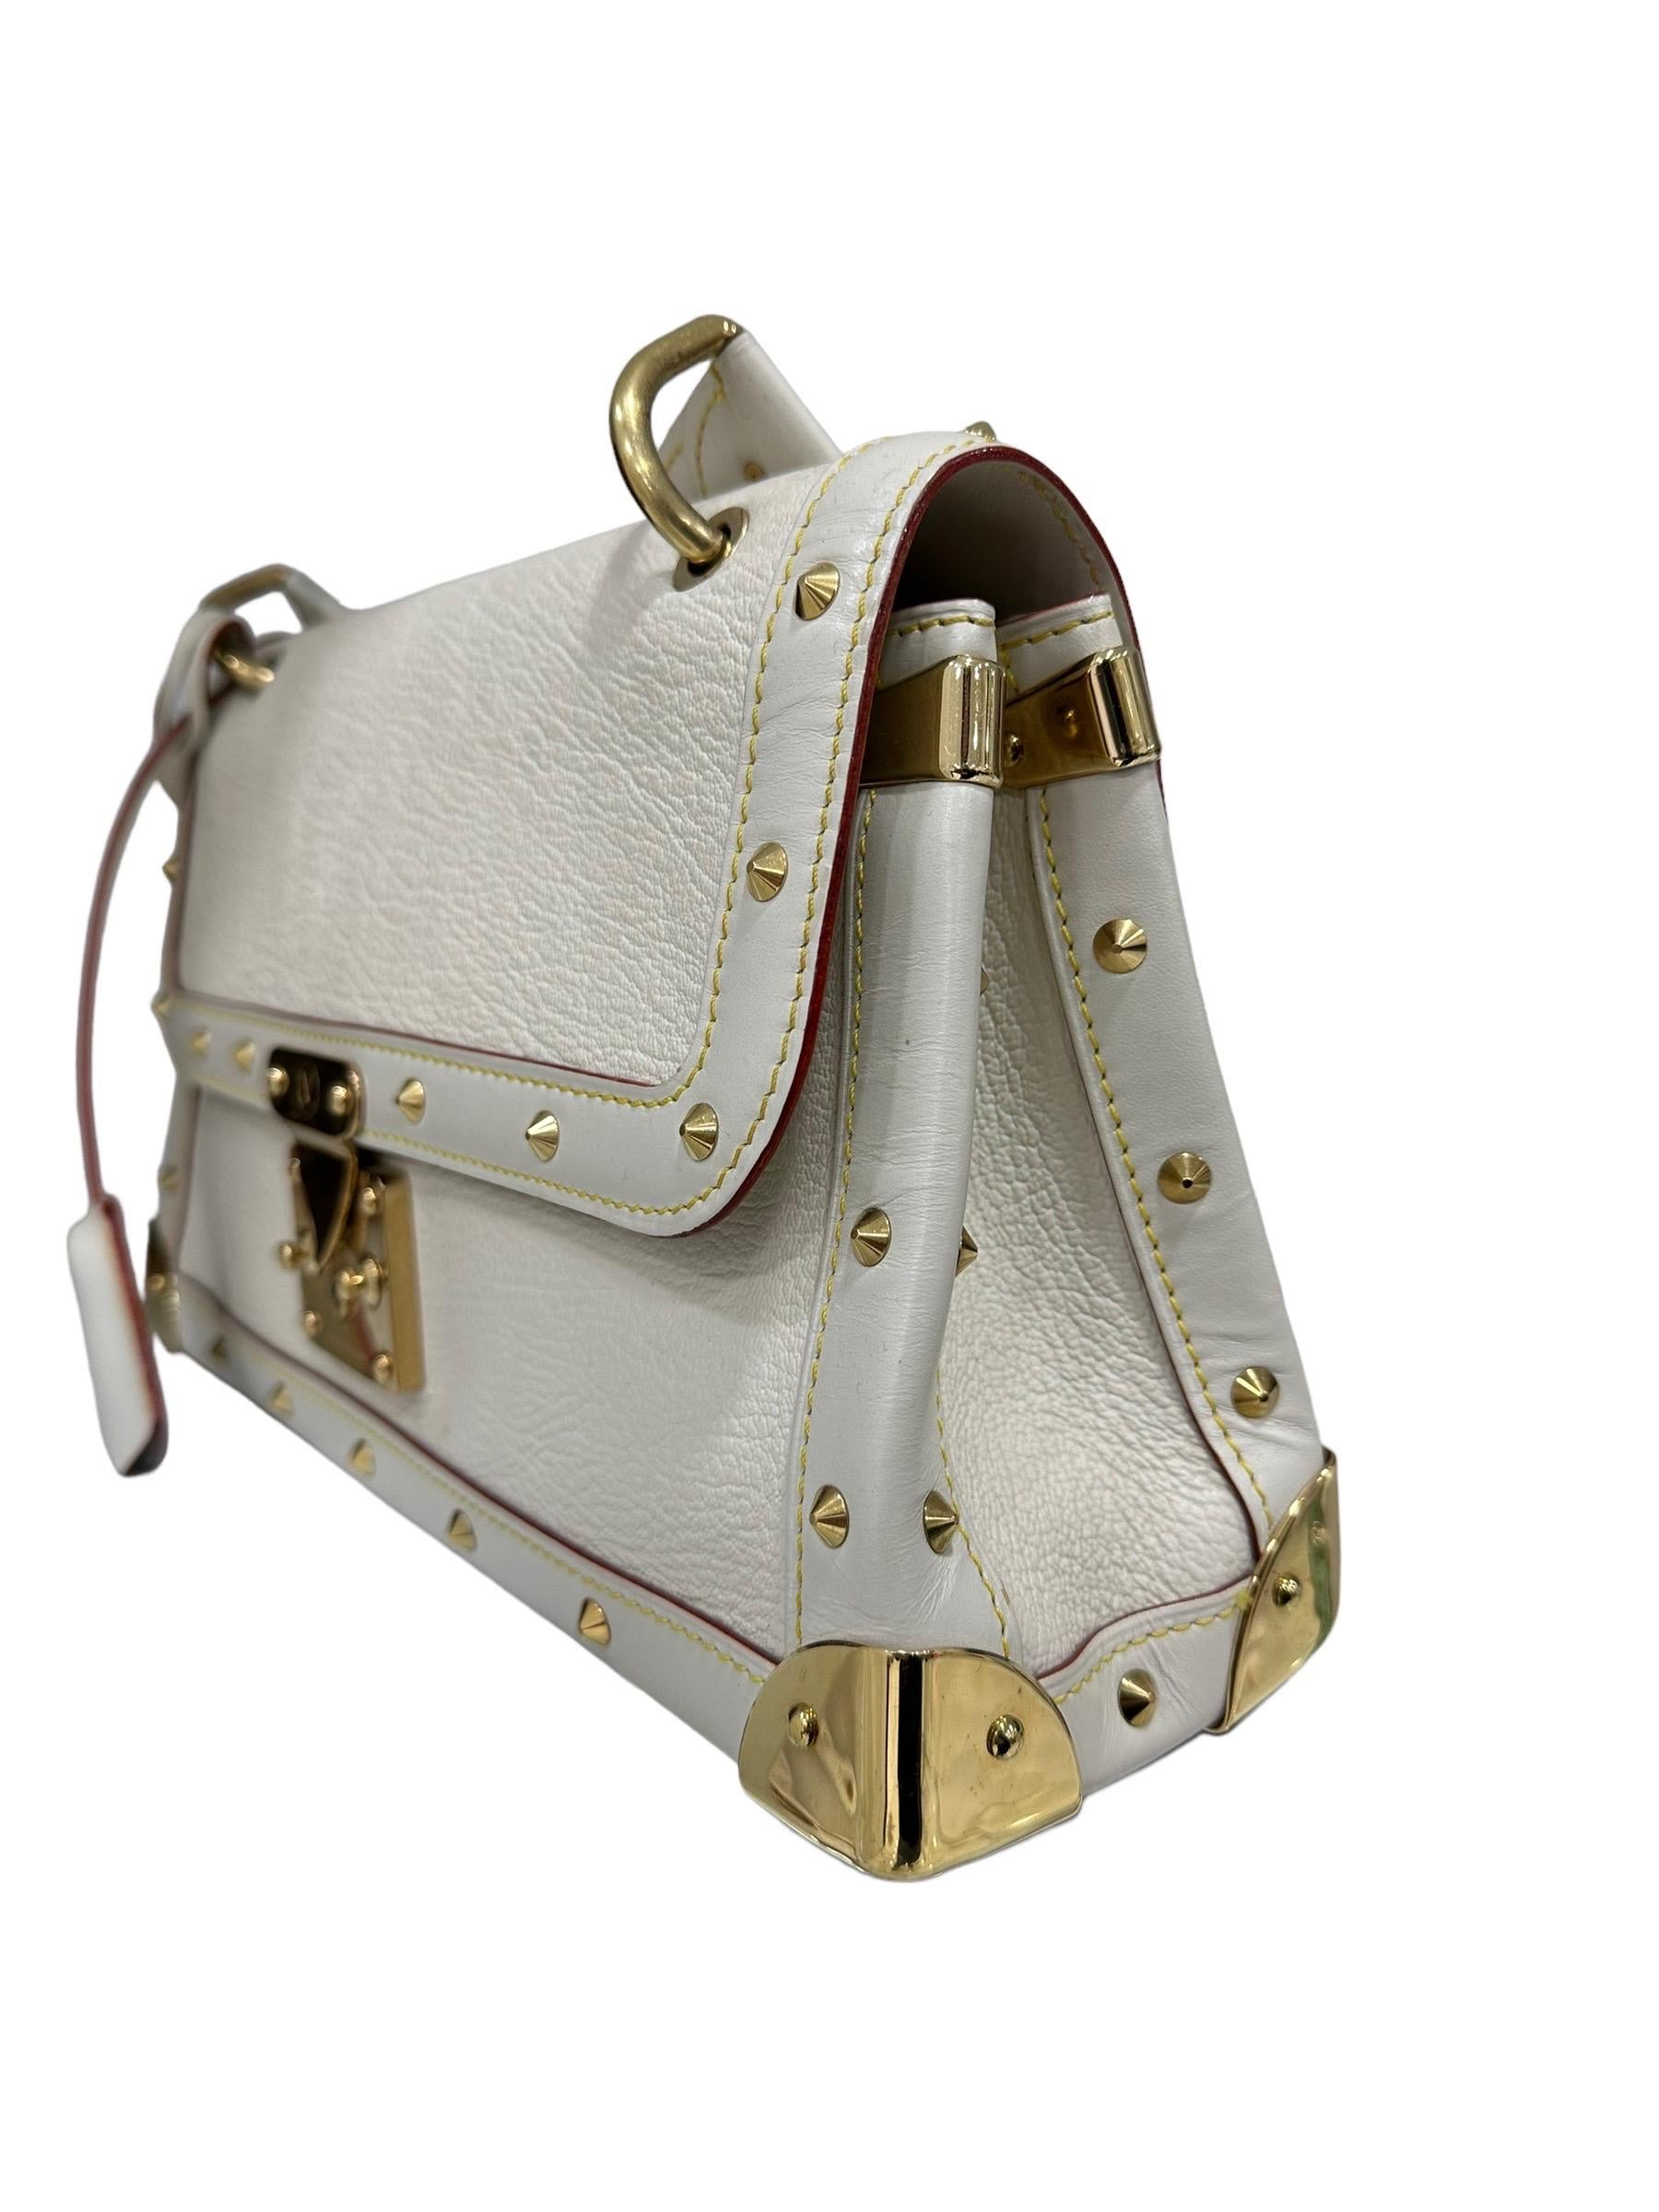 Women's Louis Vuitton Le Talentueux Top Handle Bag White Leather With Gold Hardware For Sale